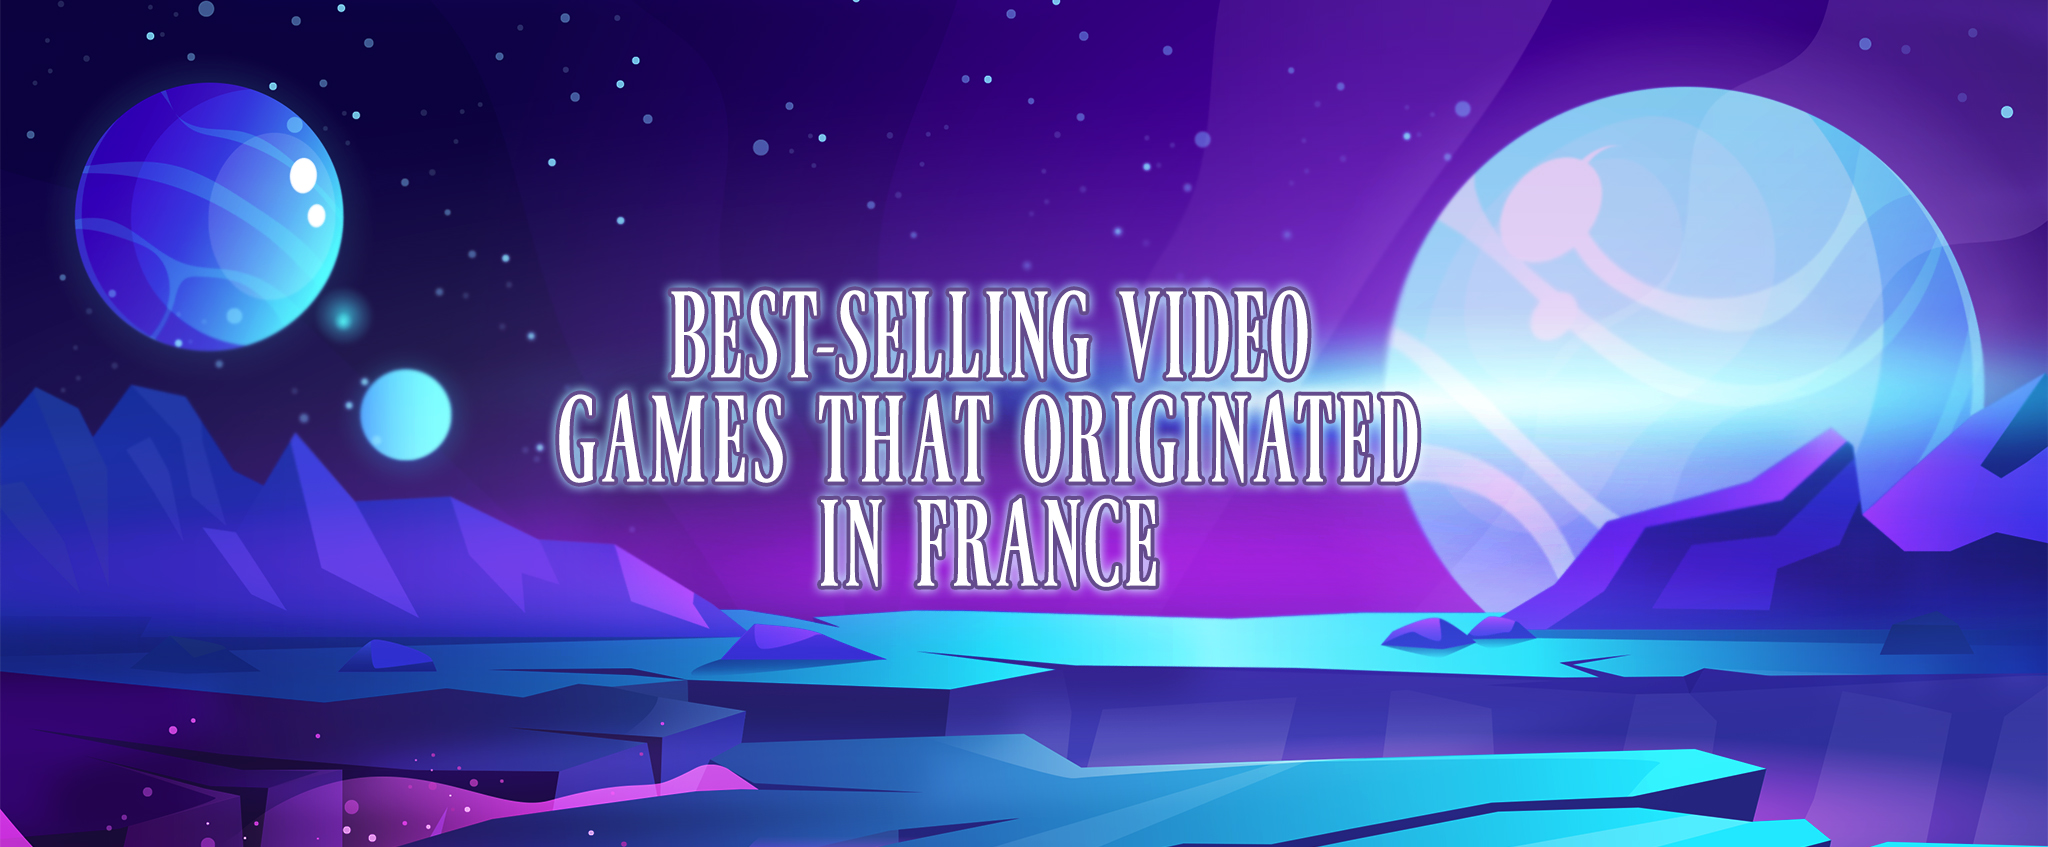 Best Selling Video Games That Originated In France